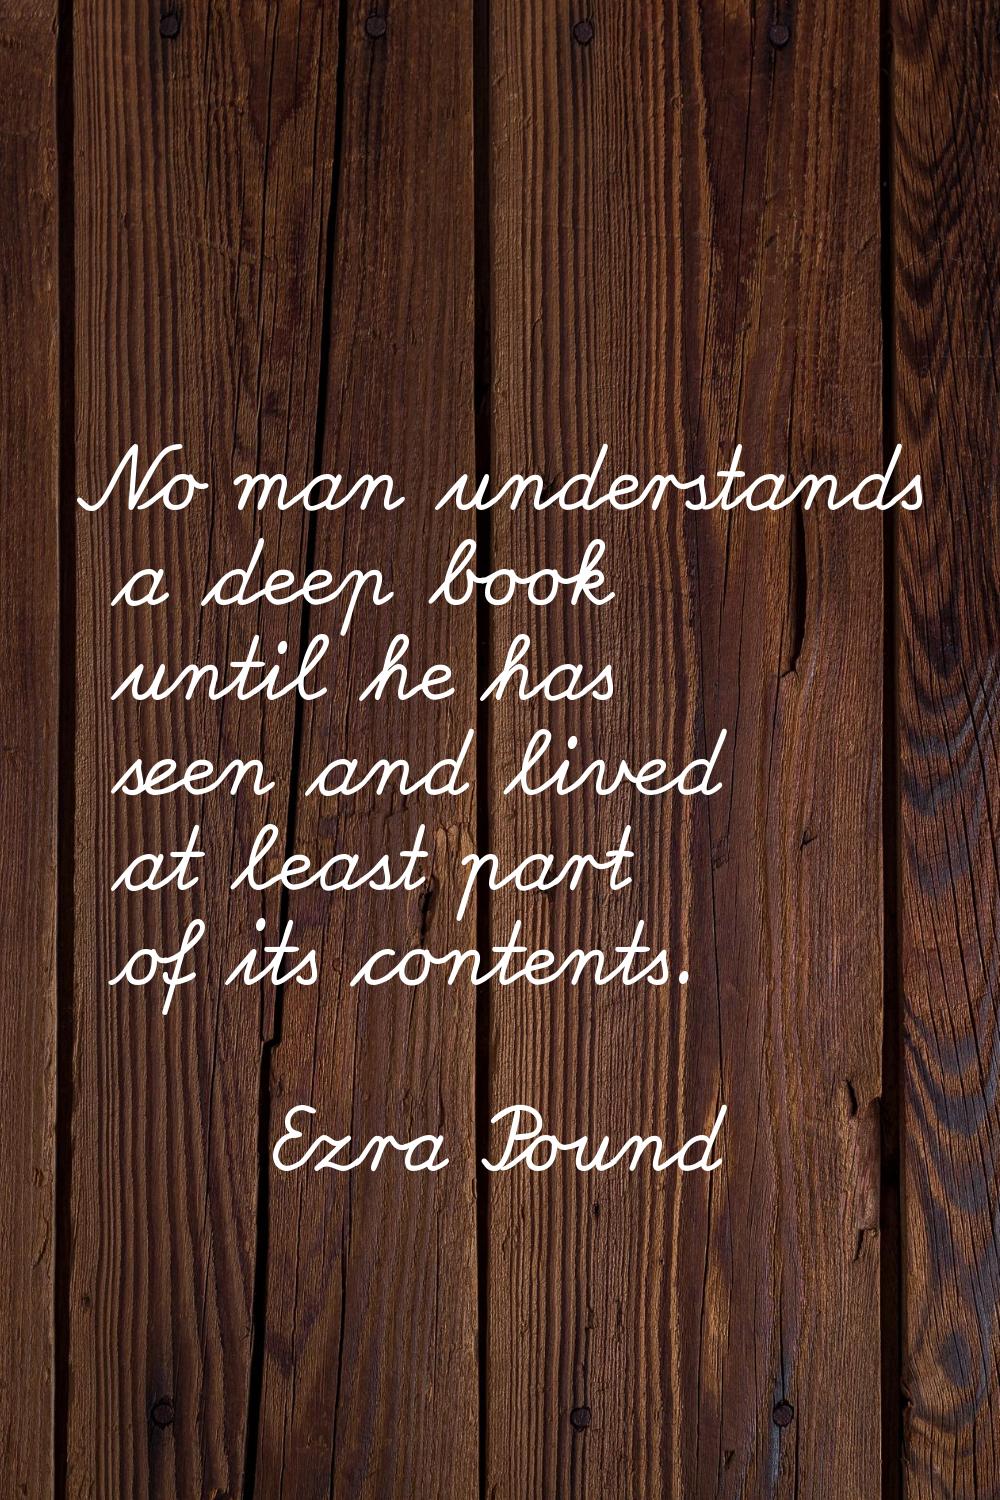 No man understands a deep book until he has seen and lived at least part of its contents.